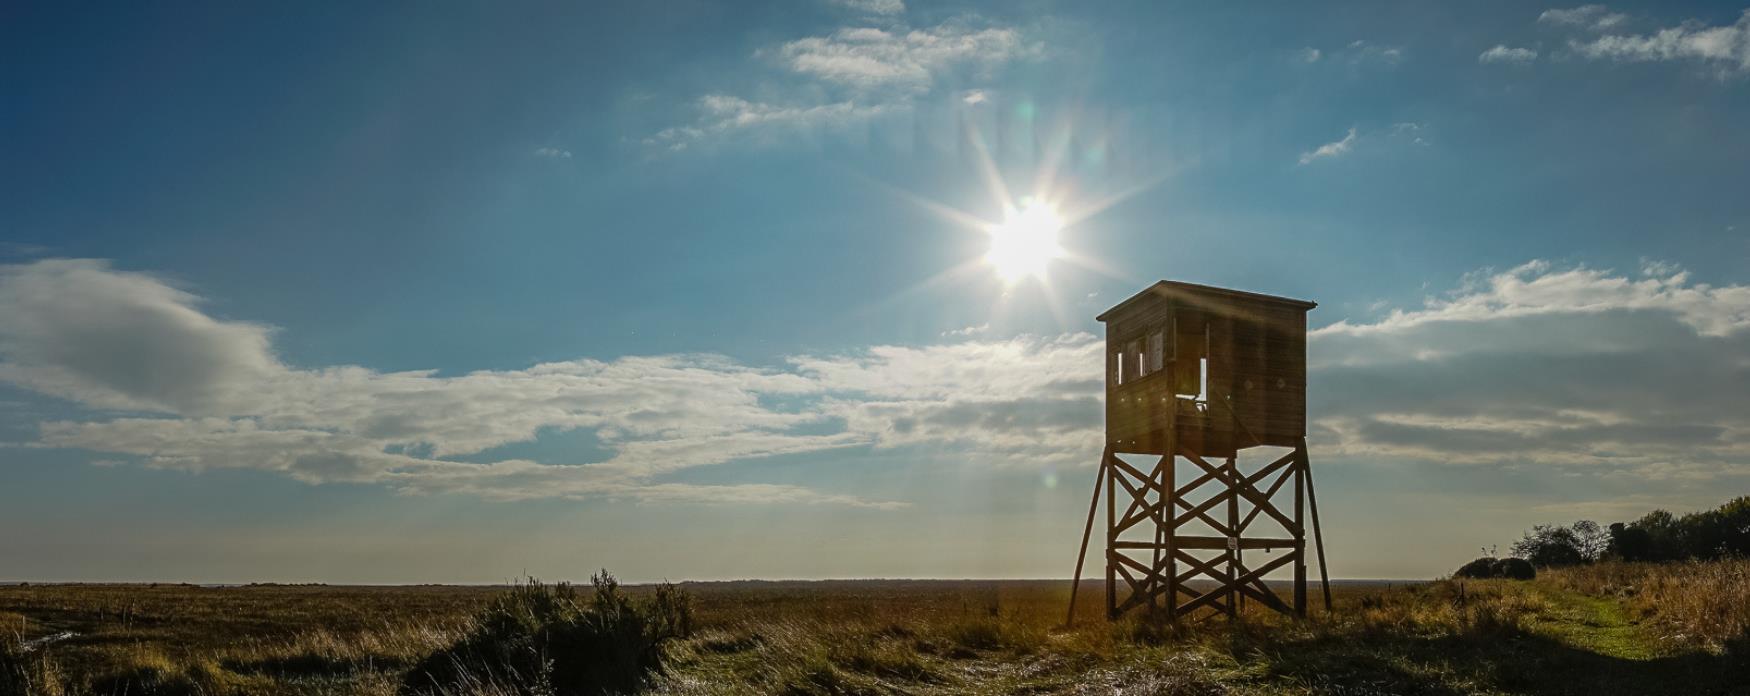 Wooden control tower silhouetted against the setting son at Bradwell-on-Sea, image by Marion Sidebottom